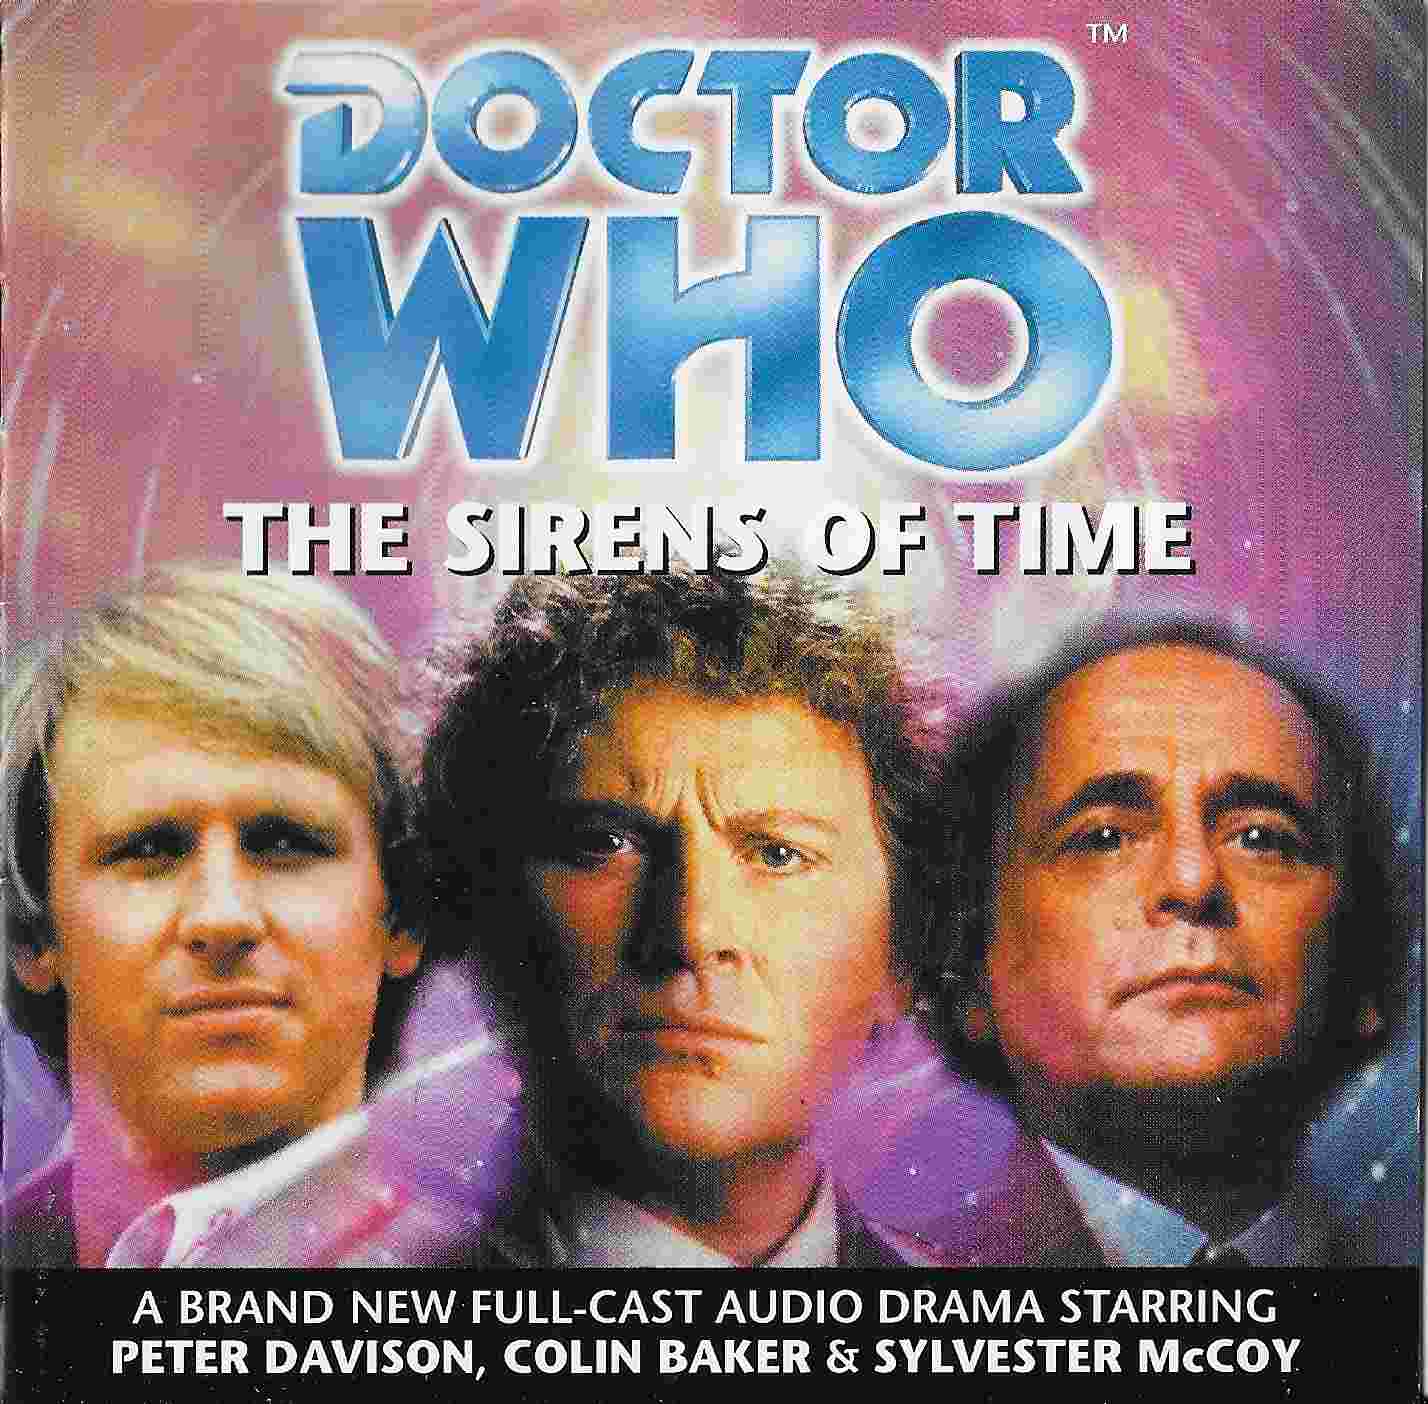 Picture of BFPDWCD 7Z Doctor who - Sirens of time  by artist Nicholas Briggs from the BBC records and Tapes library